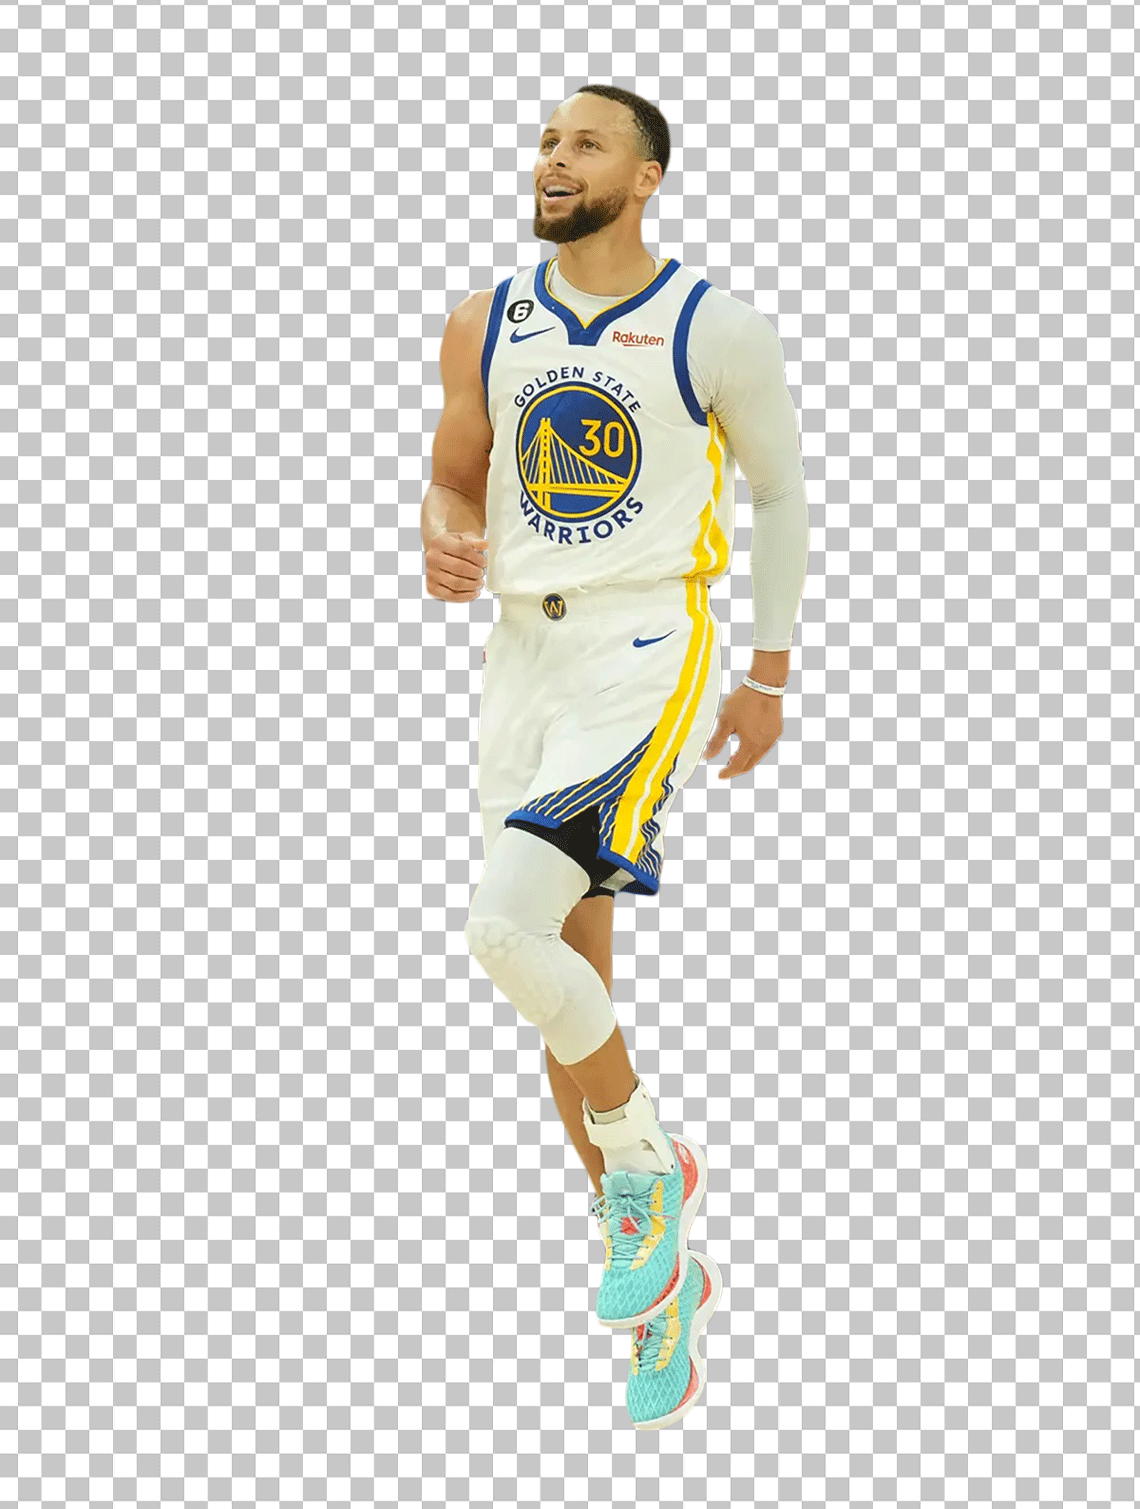 Stephen Curry wearing a white jersey and looking happy.